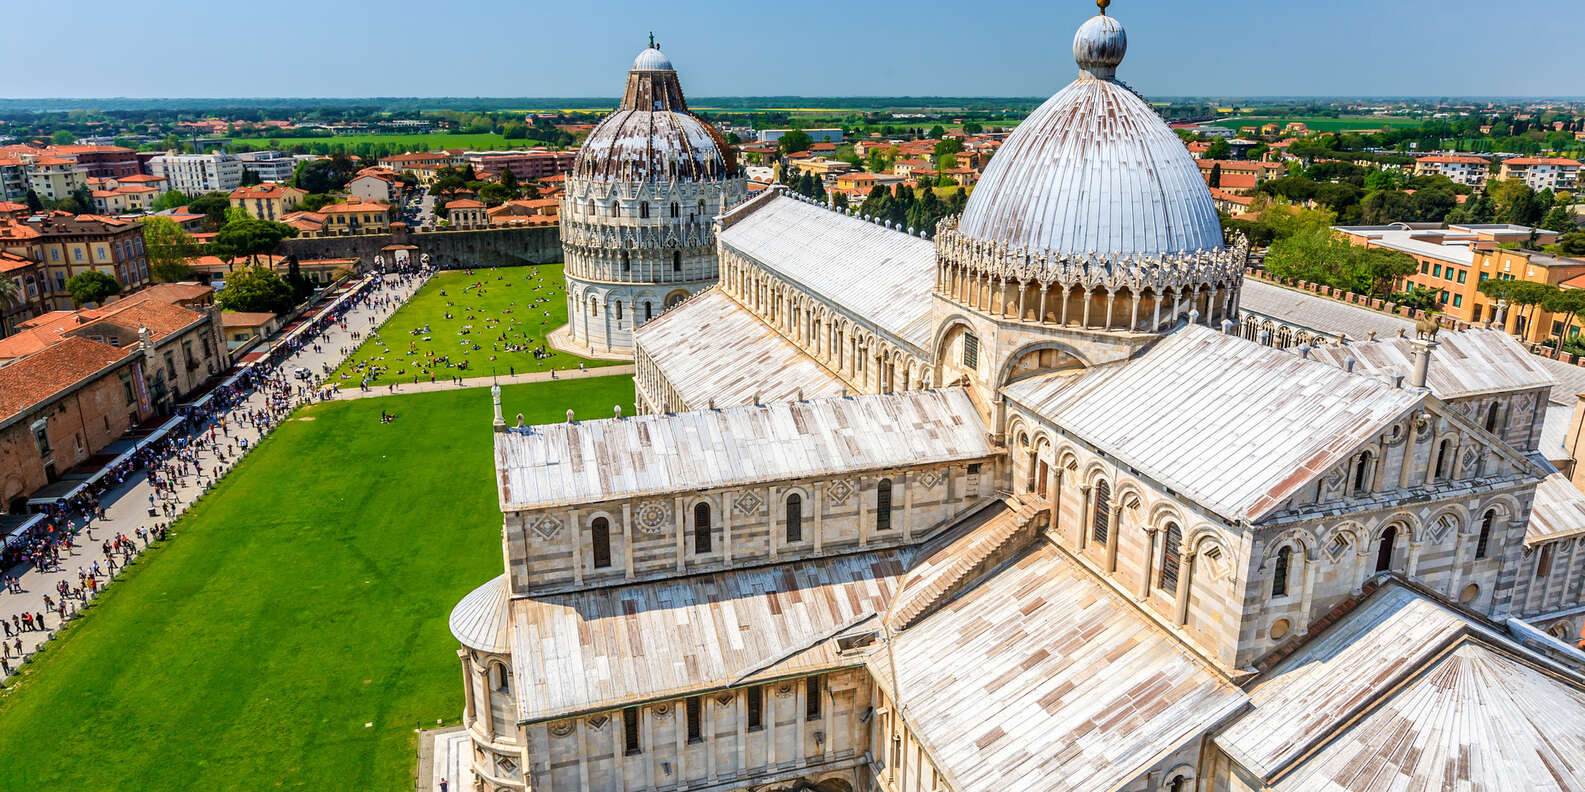 What to do in Pisa